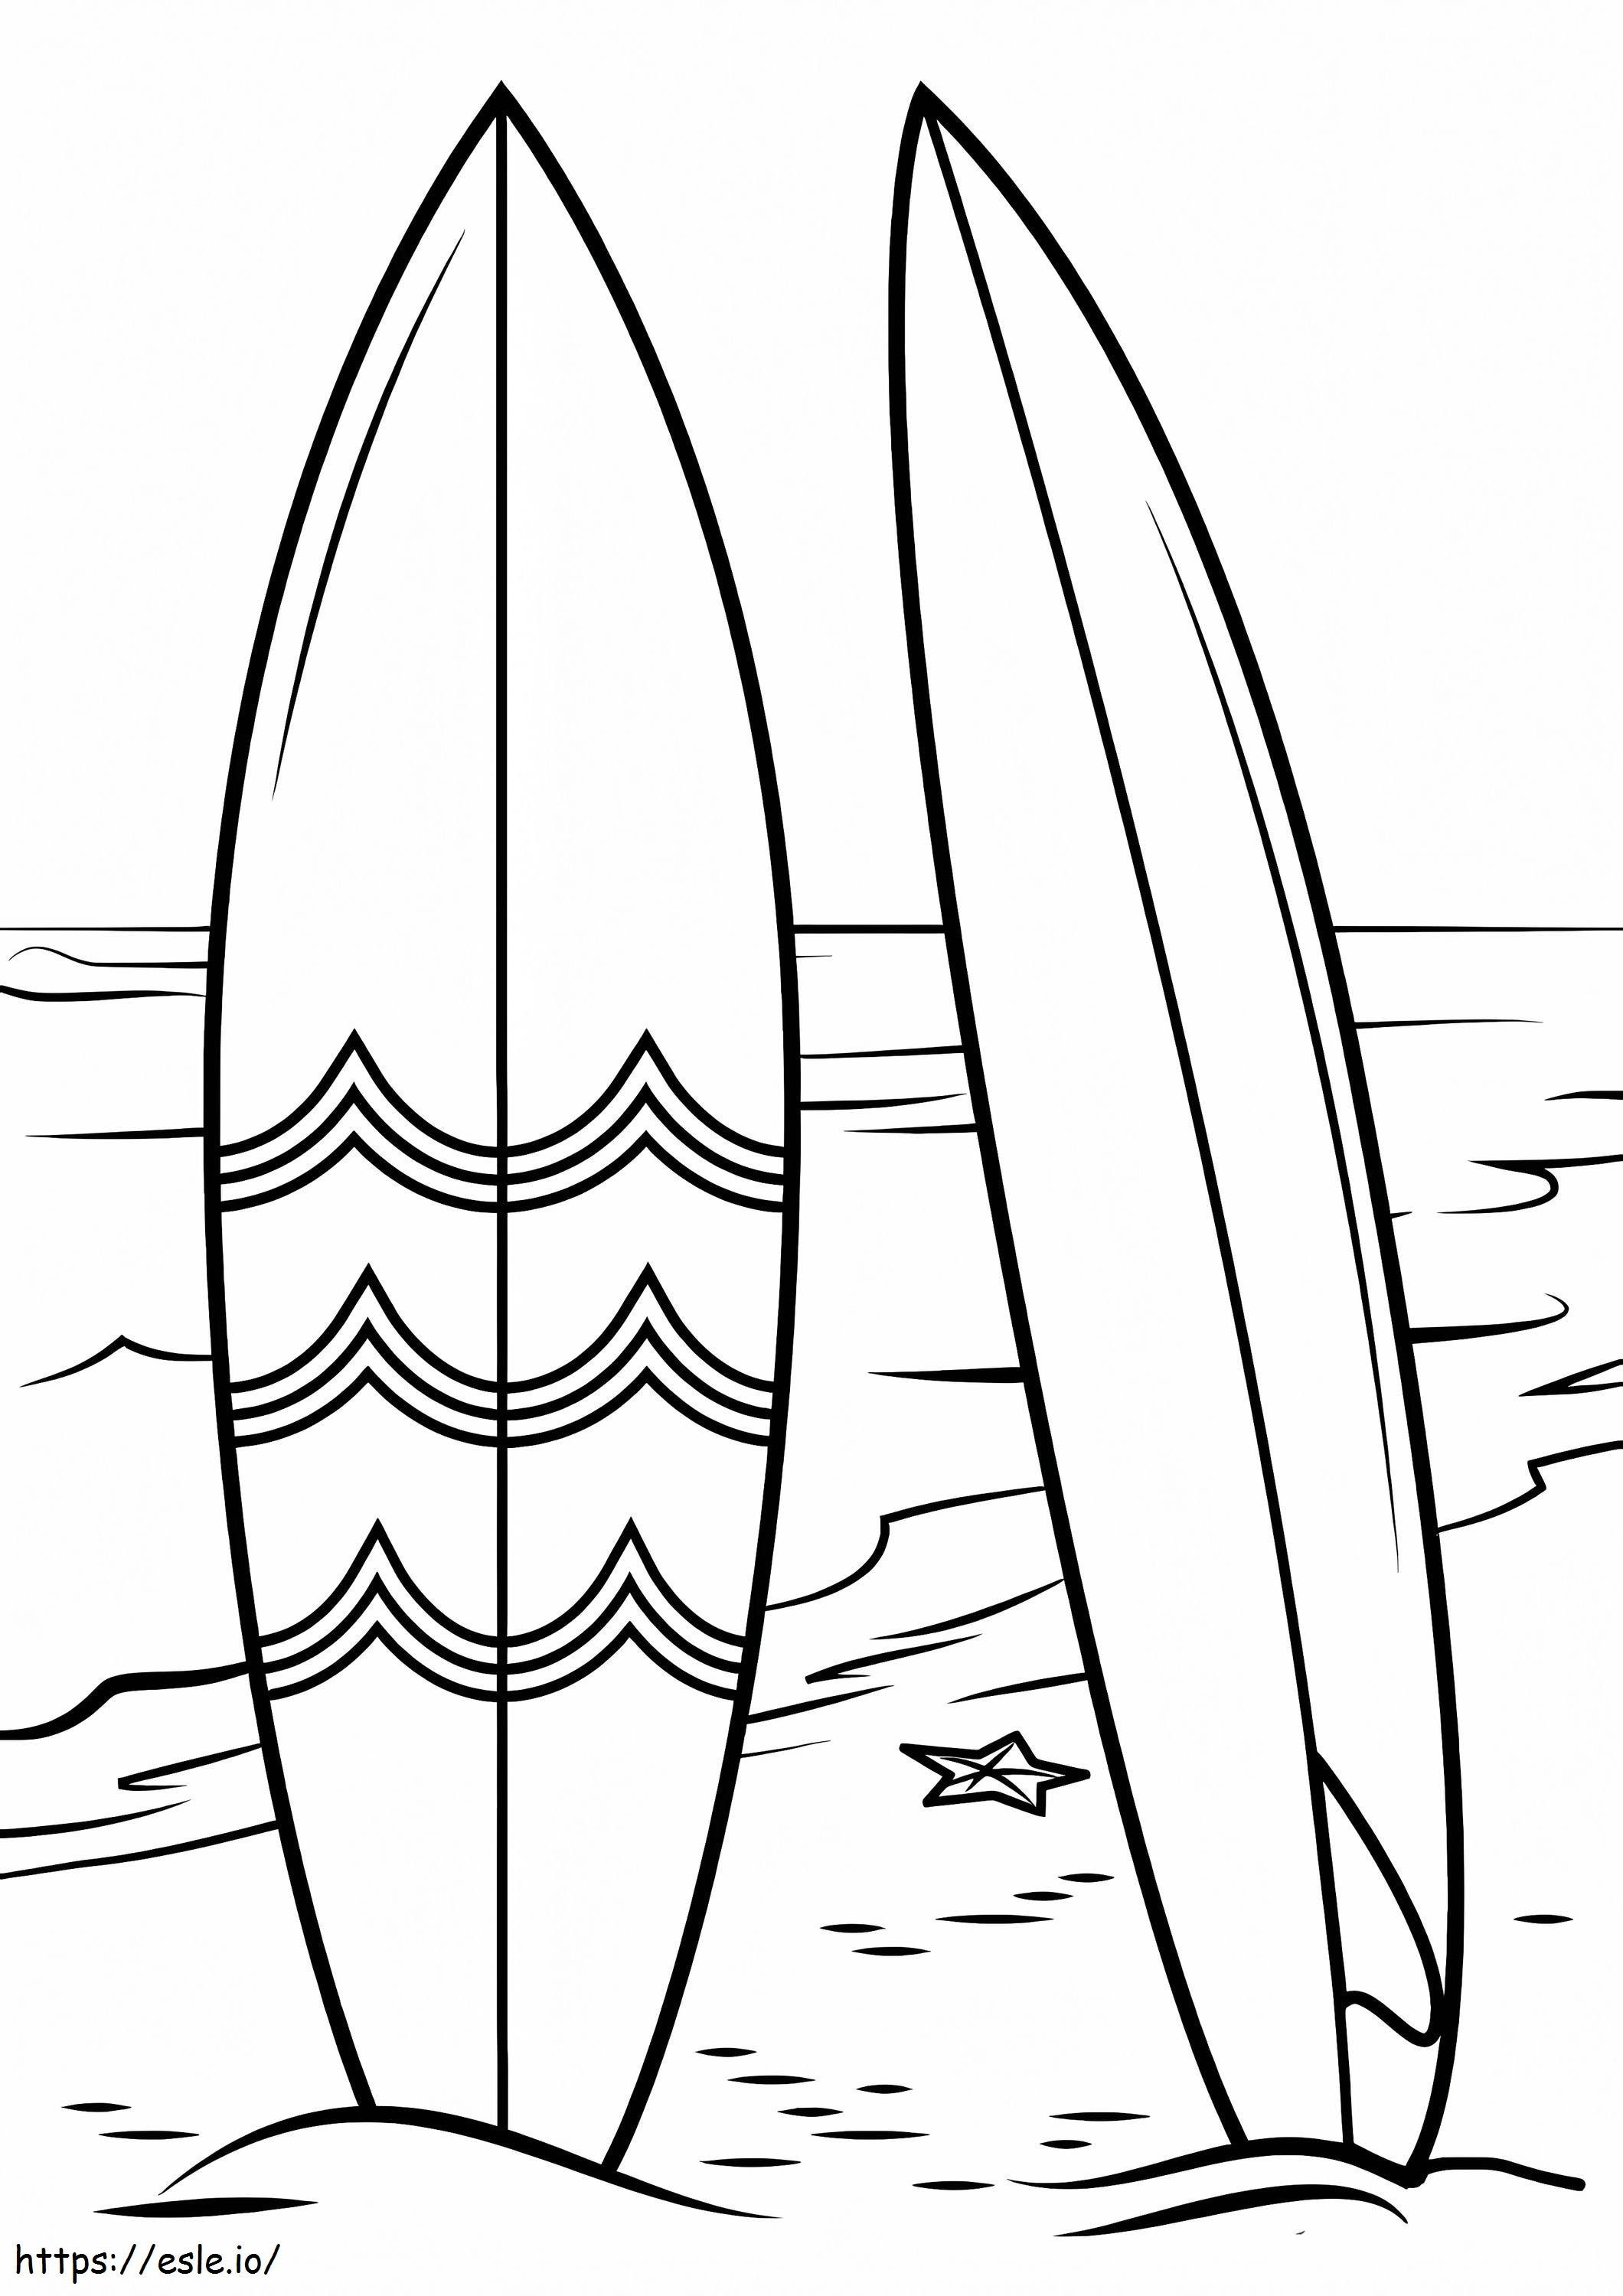 Surfboards coloring page